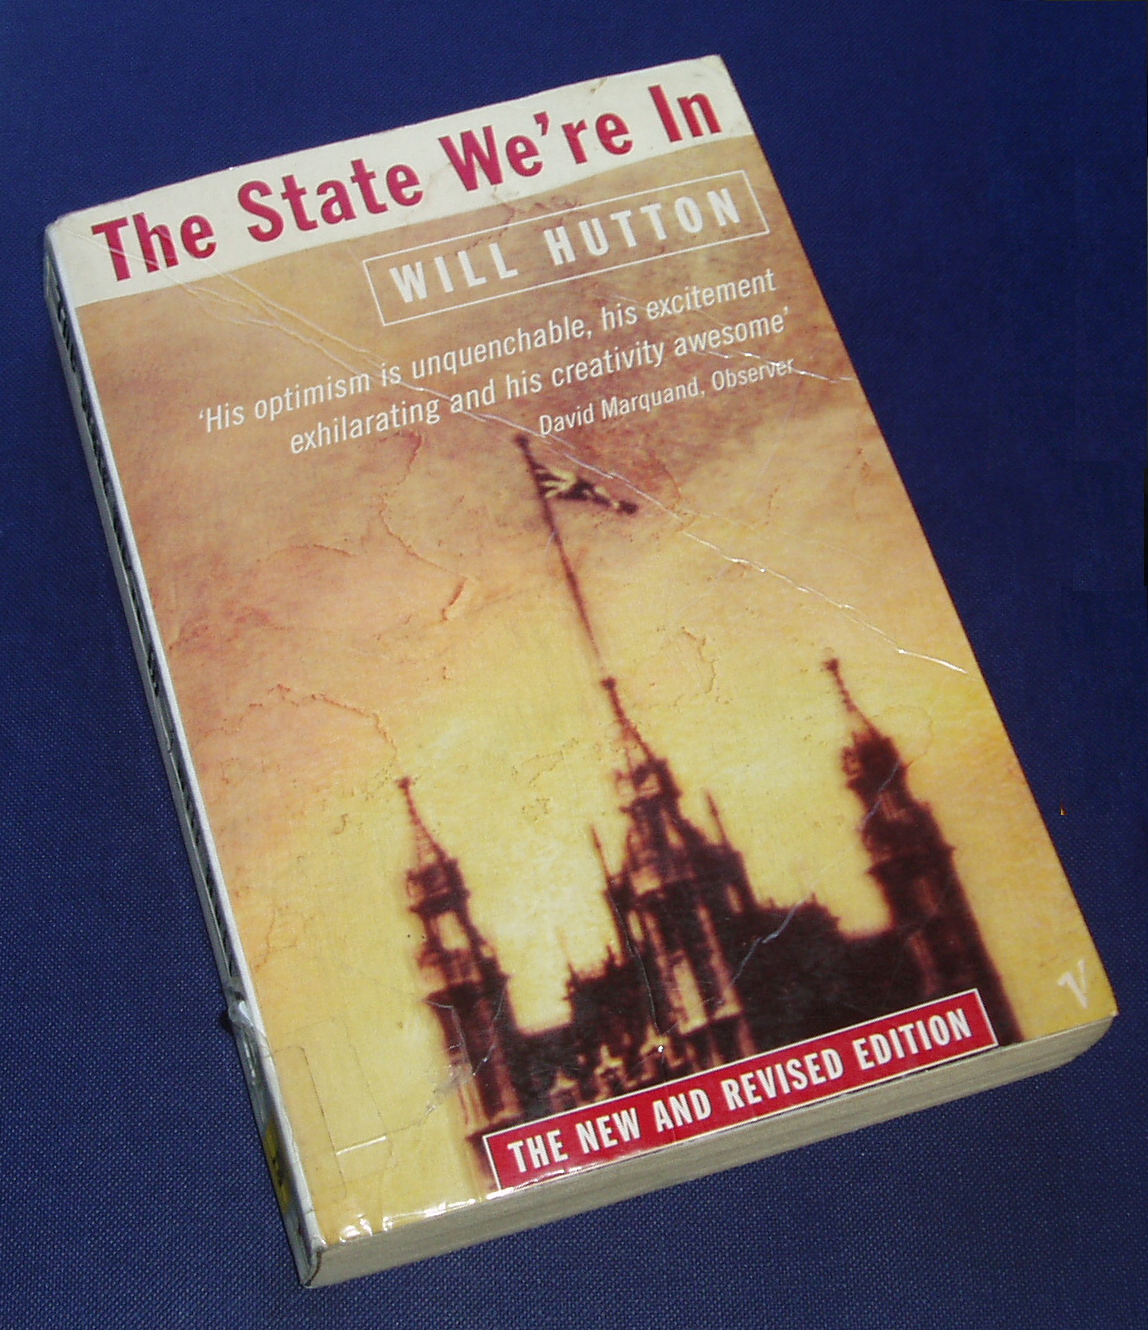 [the+state+we]